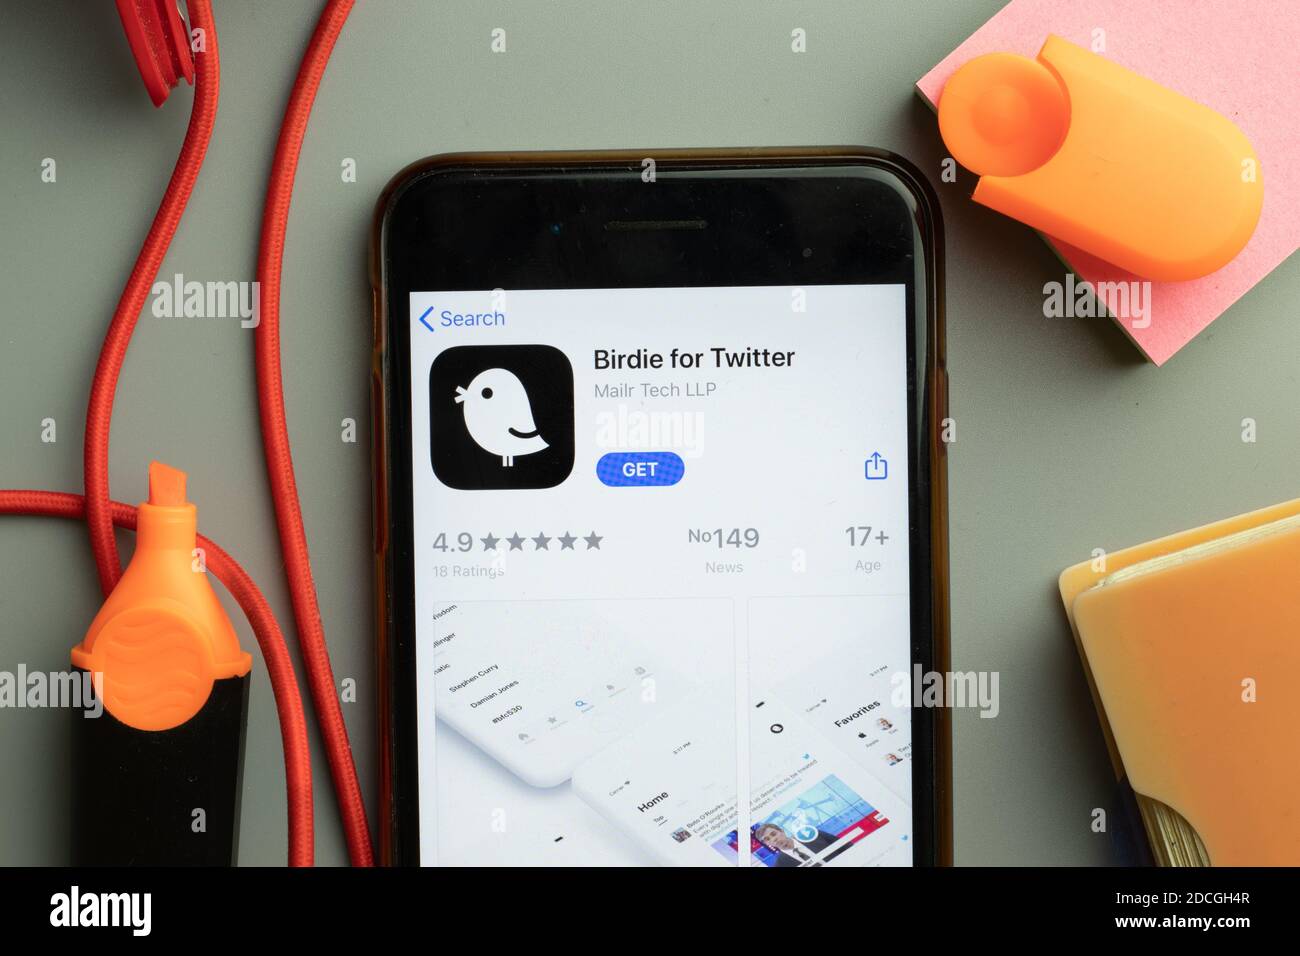 New York, United States - 7 November 2020: Phone screen close-up with Birdie for Twitter mobile app logo on display, Illustrative Editorial. Stock Photo